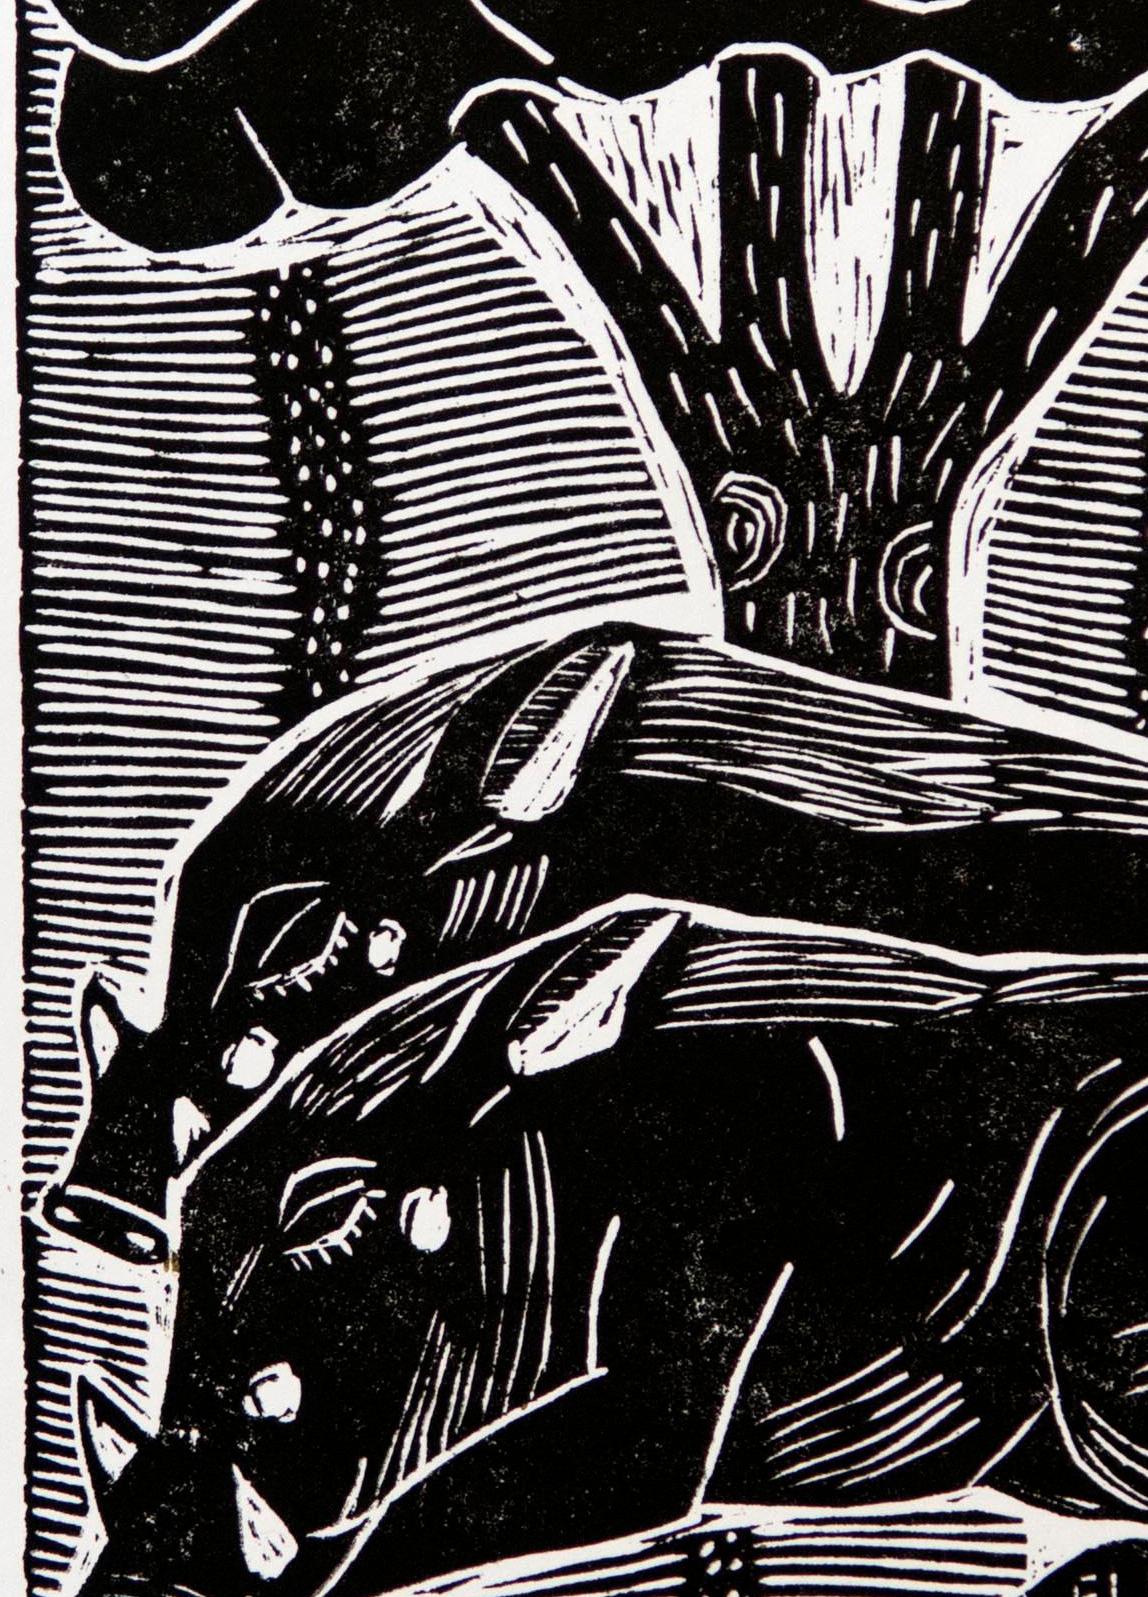 Resting under the tree, 2018. Linoleum block print on paper. Unlimited Edition

Elia Shiwoohamba was born in 1981 in Windhoek, Namibia. He graduated from the John Muafangejo Art Centre in Windhoek in 2006. Specialising in printmaking and sculpture,